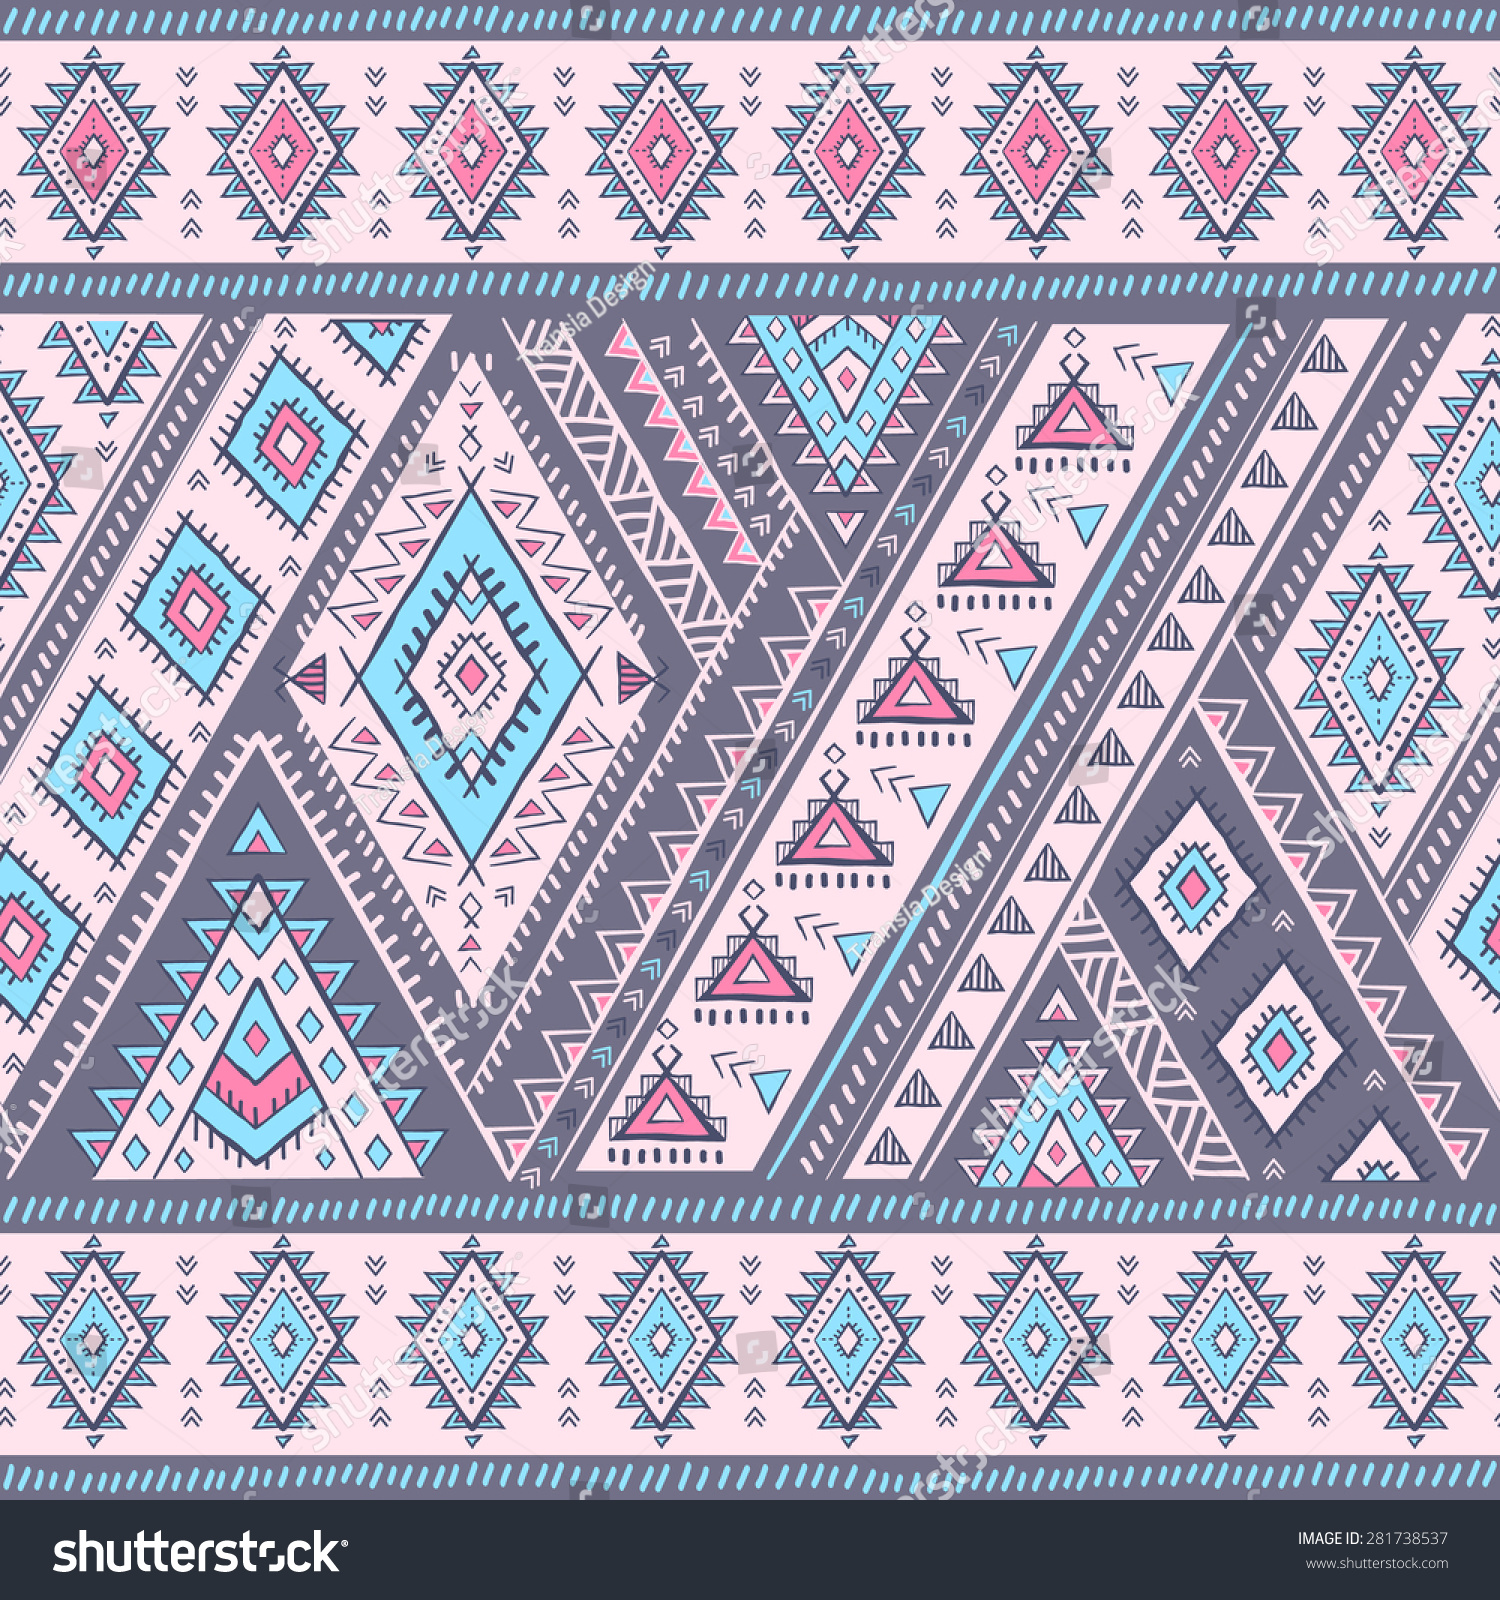 Vector Tribal Mexican Vintage Ethnic Seamless Stock Vector (Royalty ...